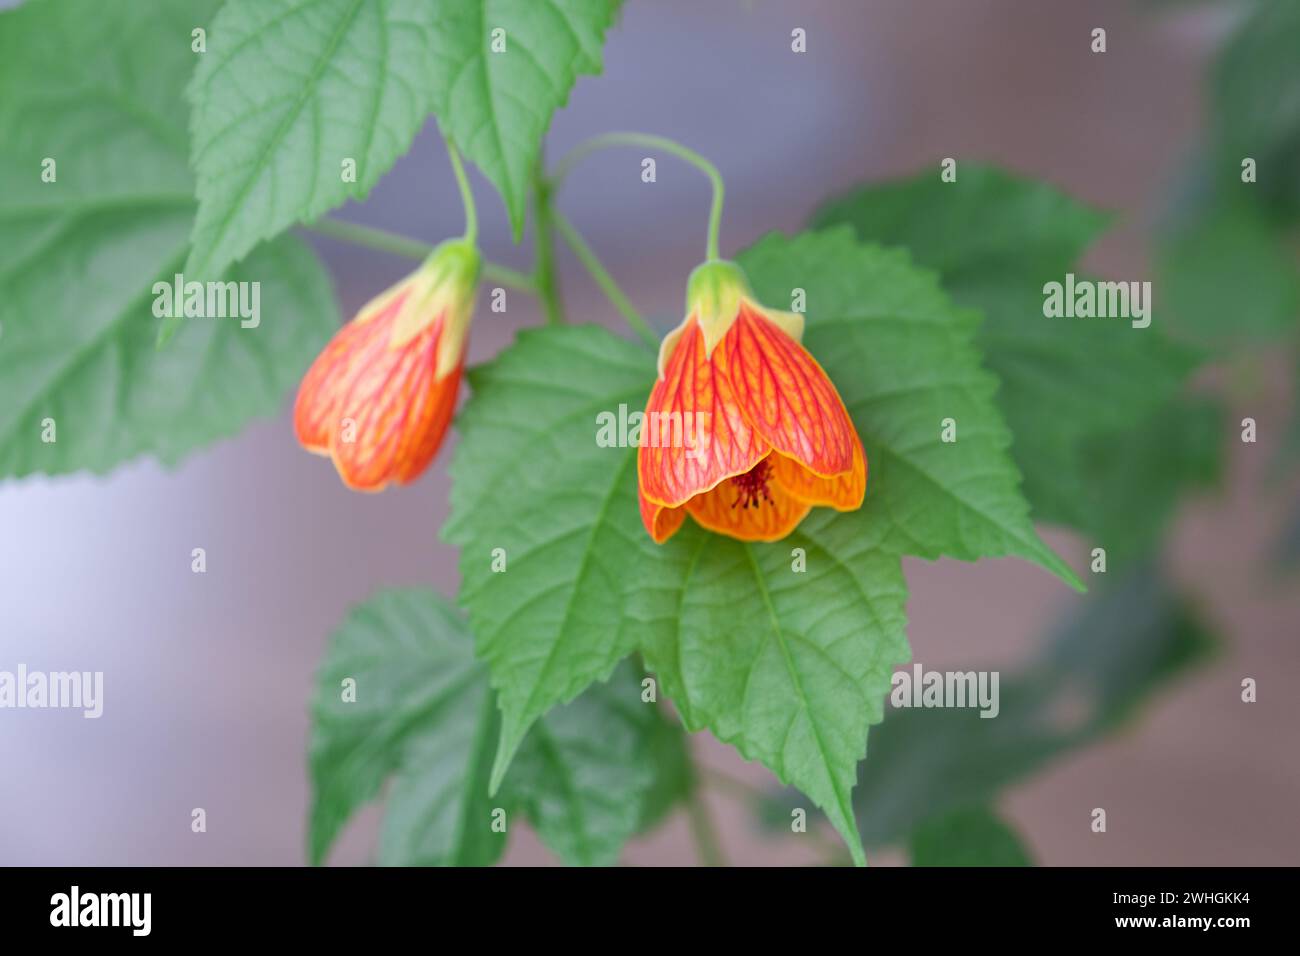 Flowering orange bell flower Abutilon close-up, a ropeberry from the Malvaceae family. Care and cultivation of domestic plants o Stock Photo